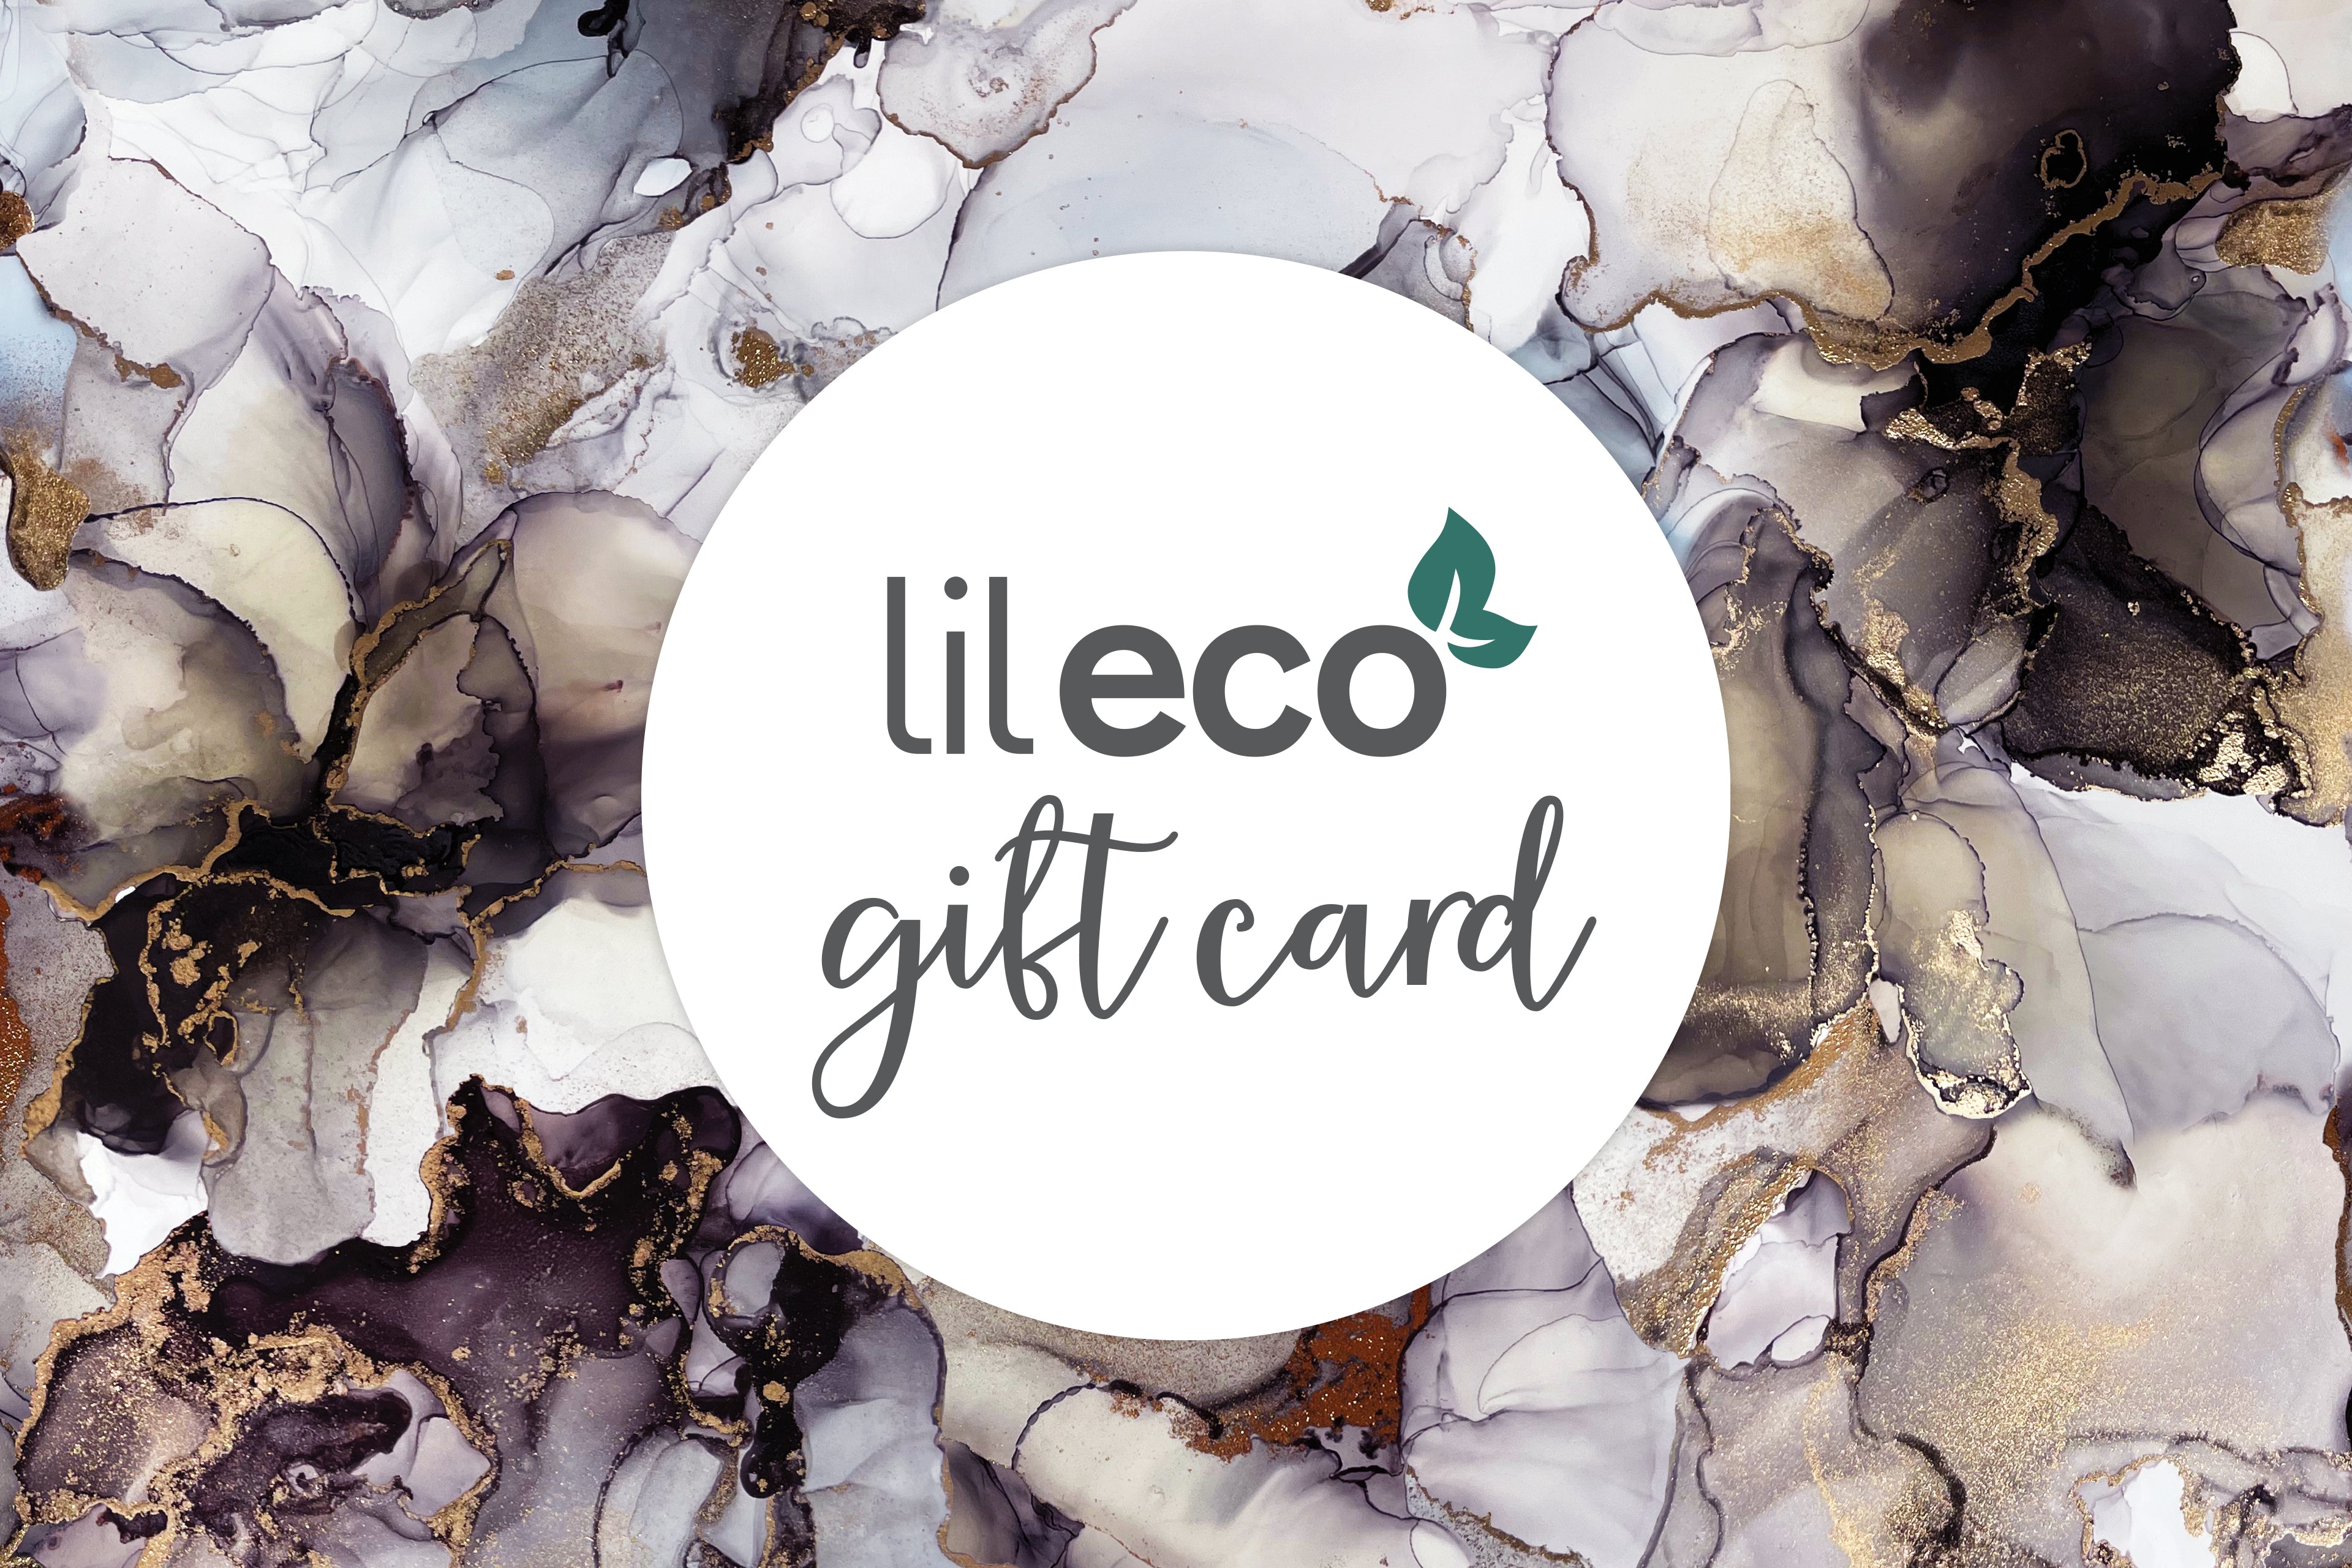 lil eco gift card